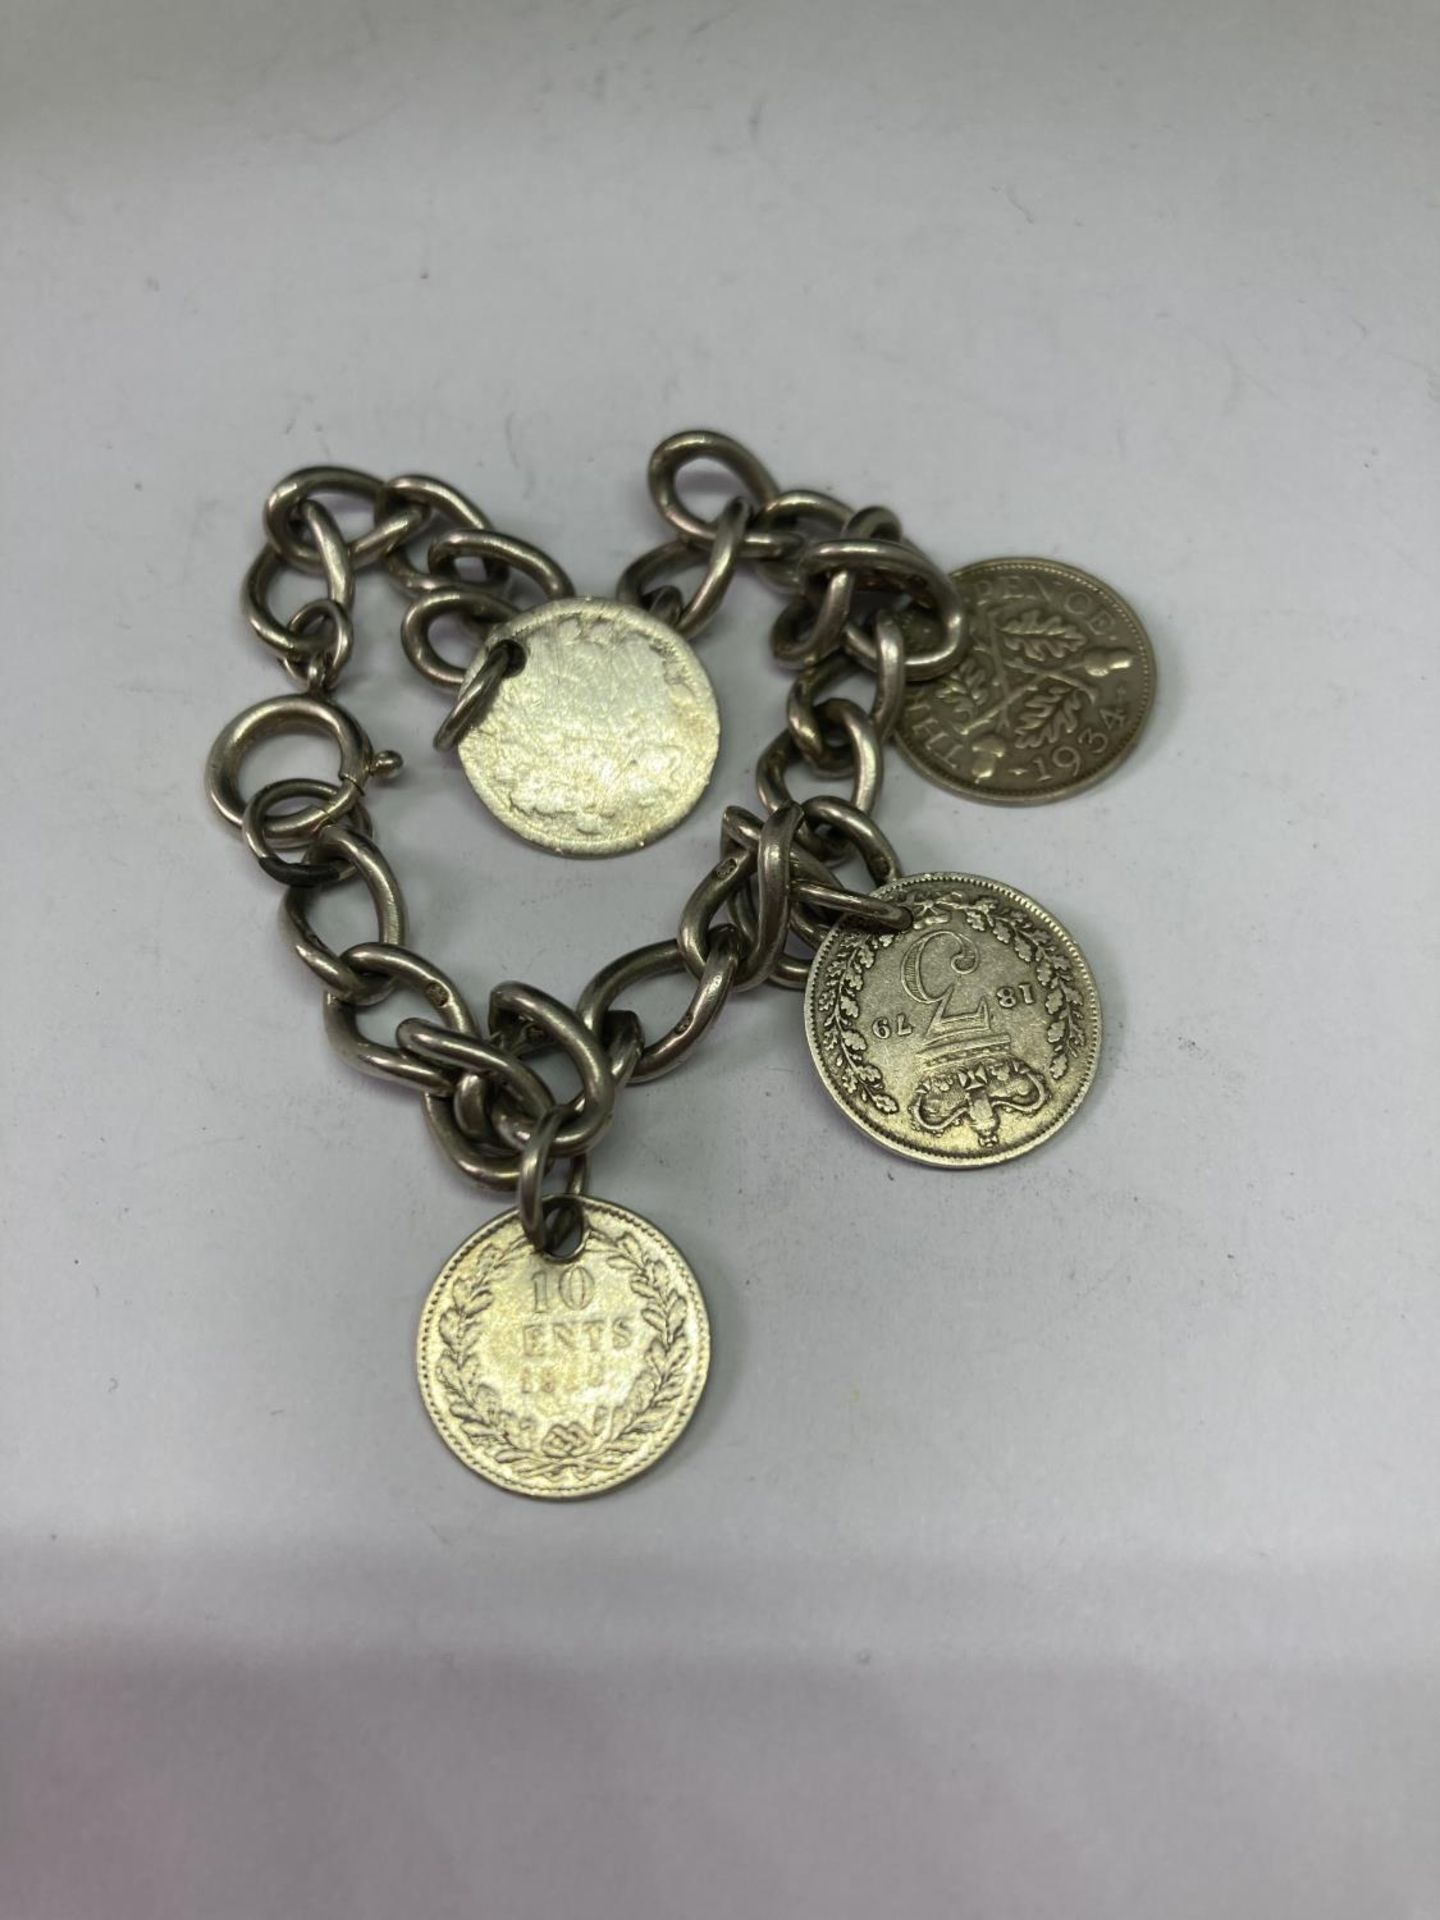 A SILVER COIN CHARM BRACELET - Image 3 of 3